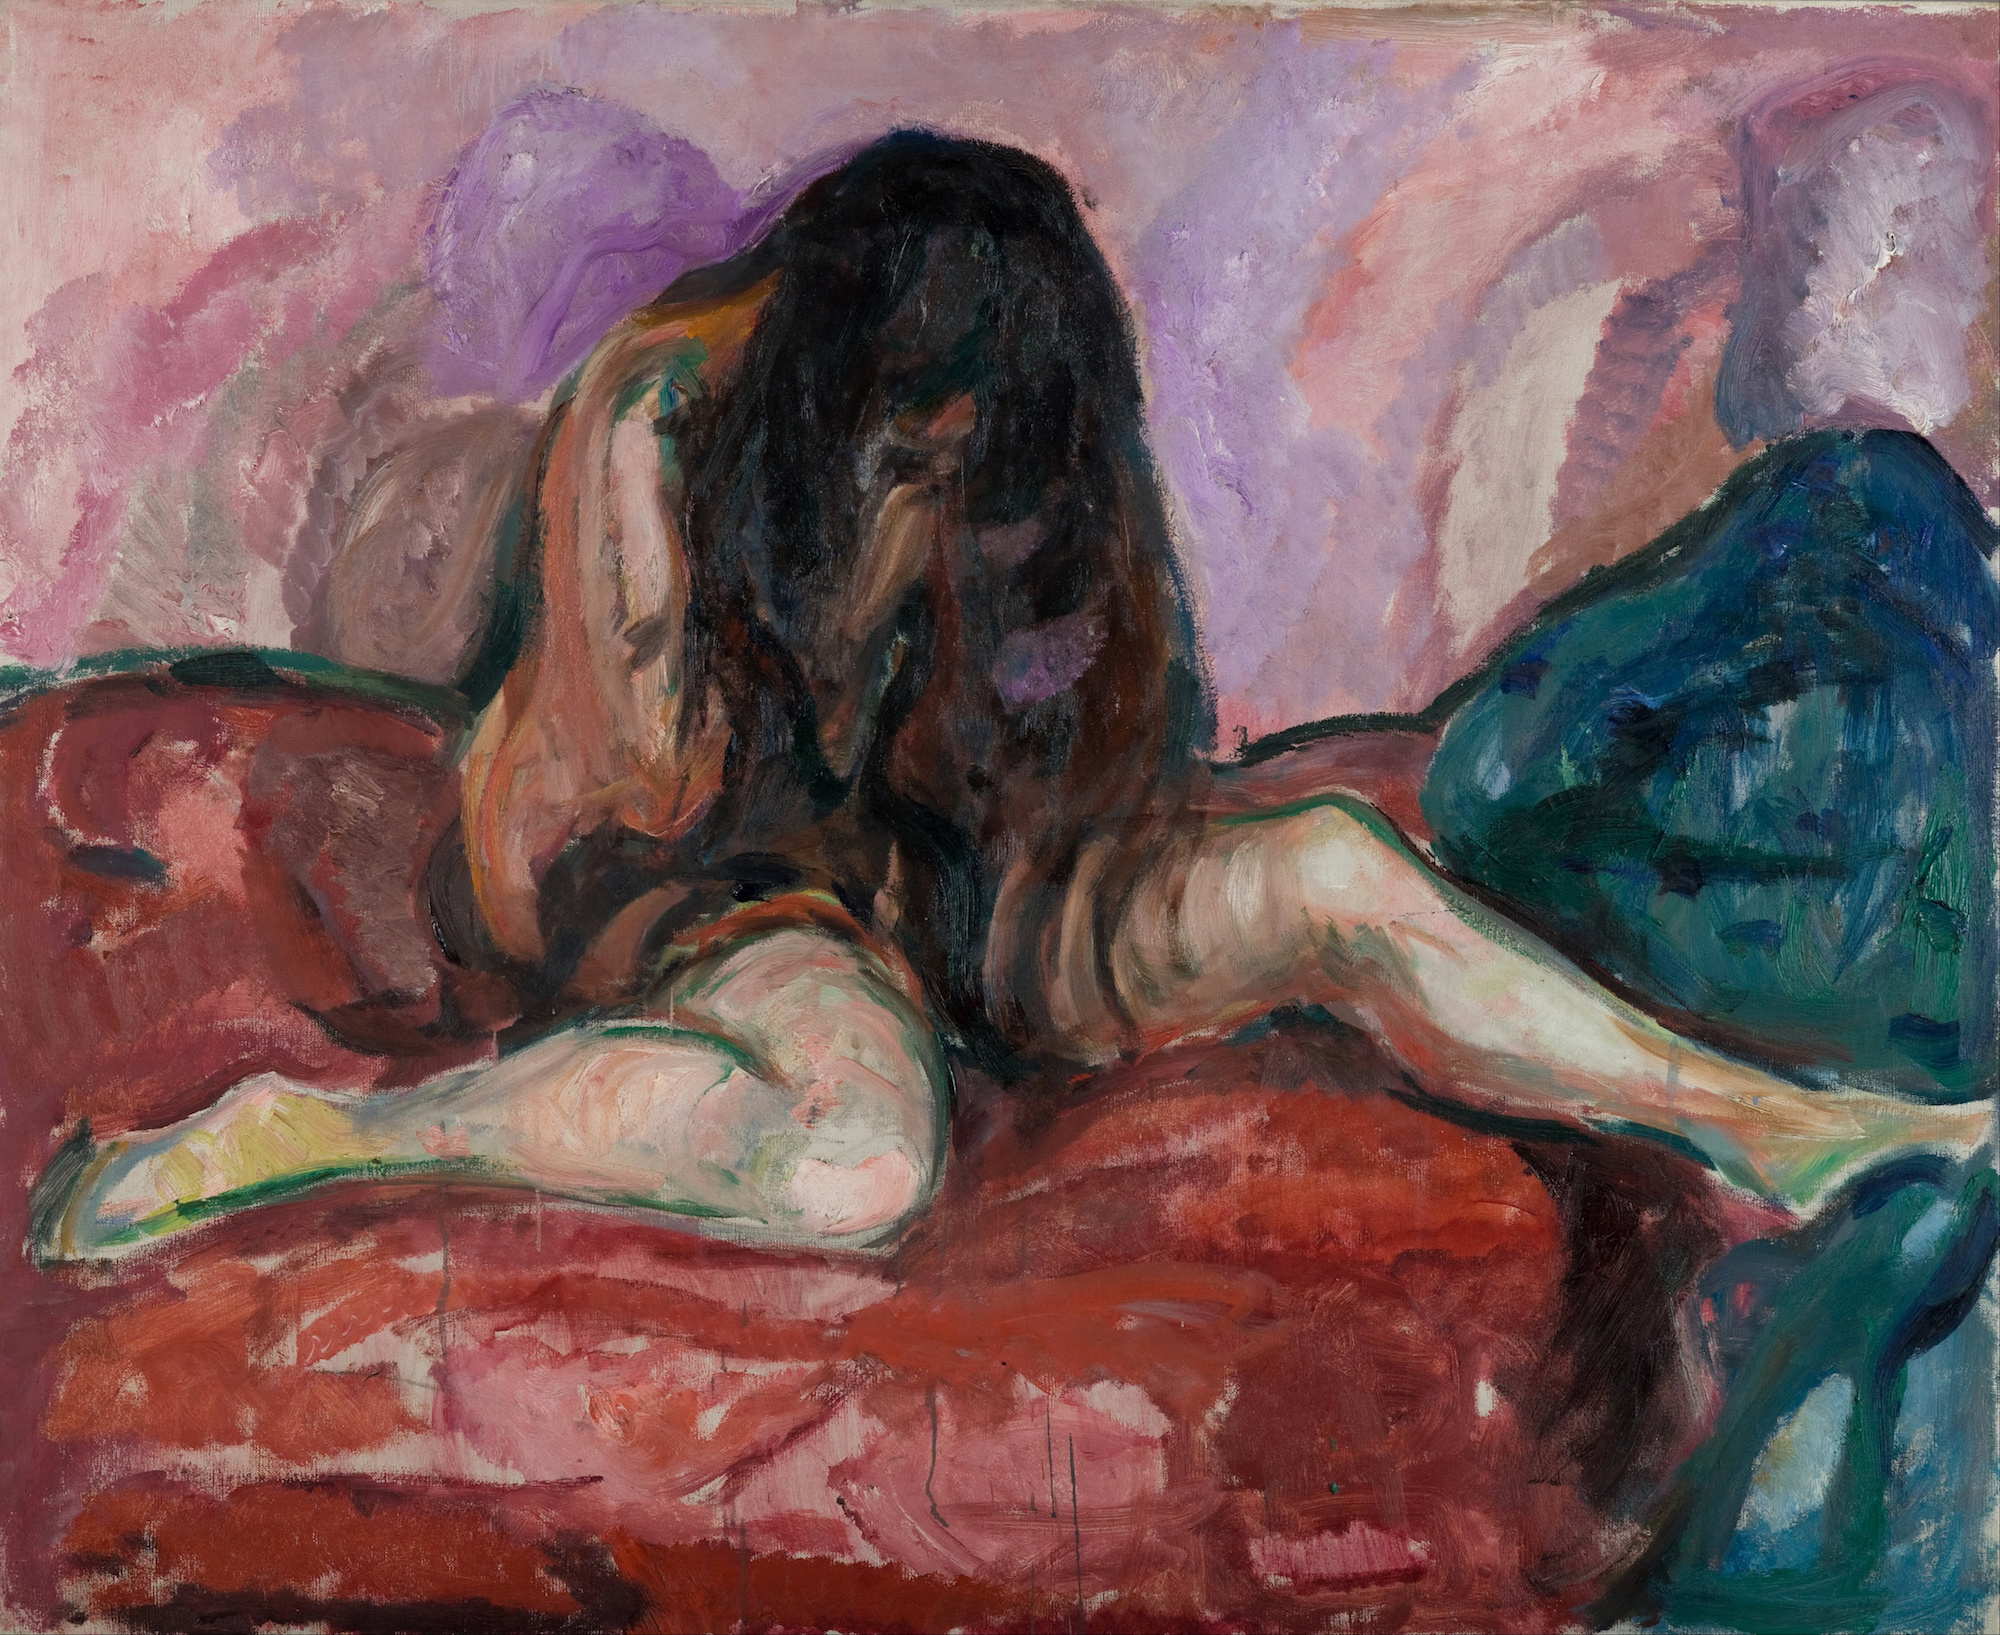 Weeping Nude by Edvard Munch - 1913/1914 - 110 x 135 cm Munch Museum